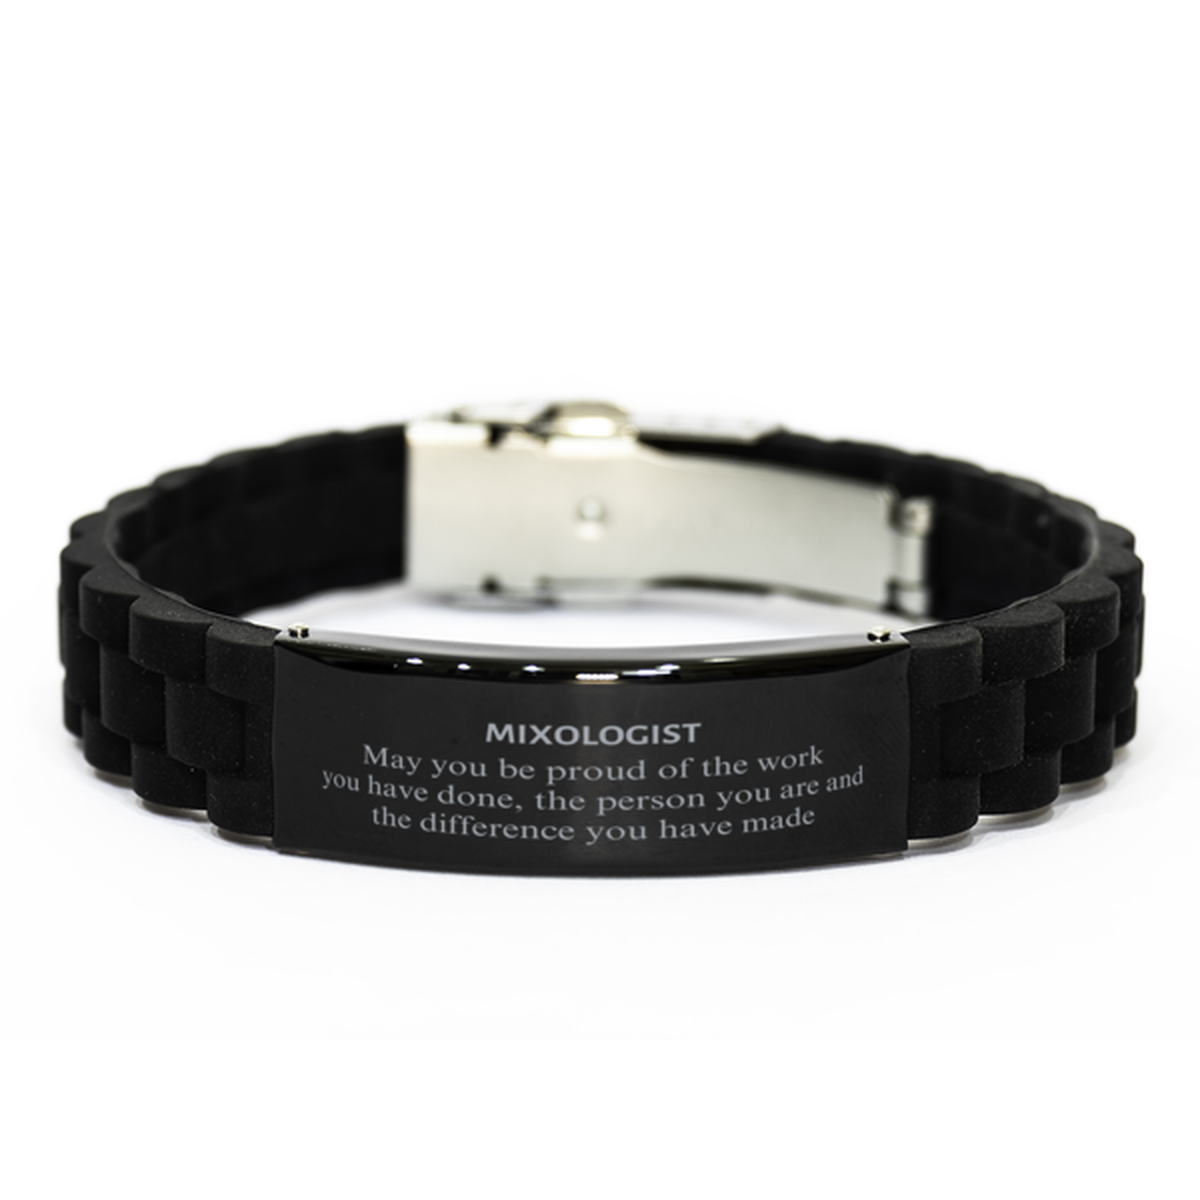 Mixologist May you be proud of the work you have done, Retirement Mixologist Black Glidelock Clasp Bracelet for Colleague Appreciation Gifts Amazing for Mixologist